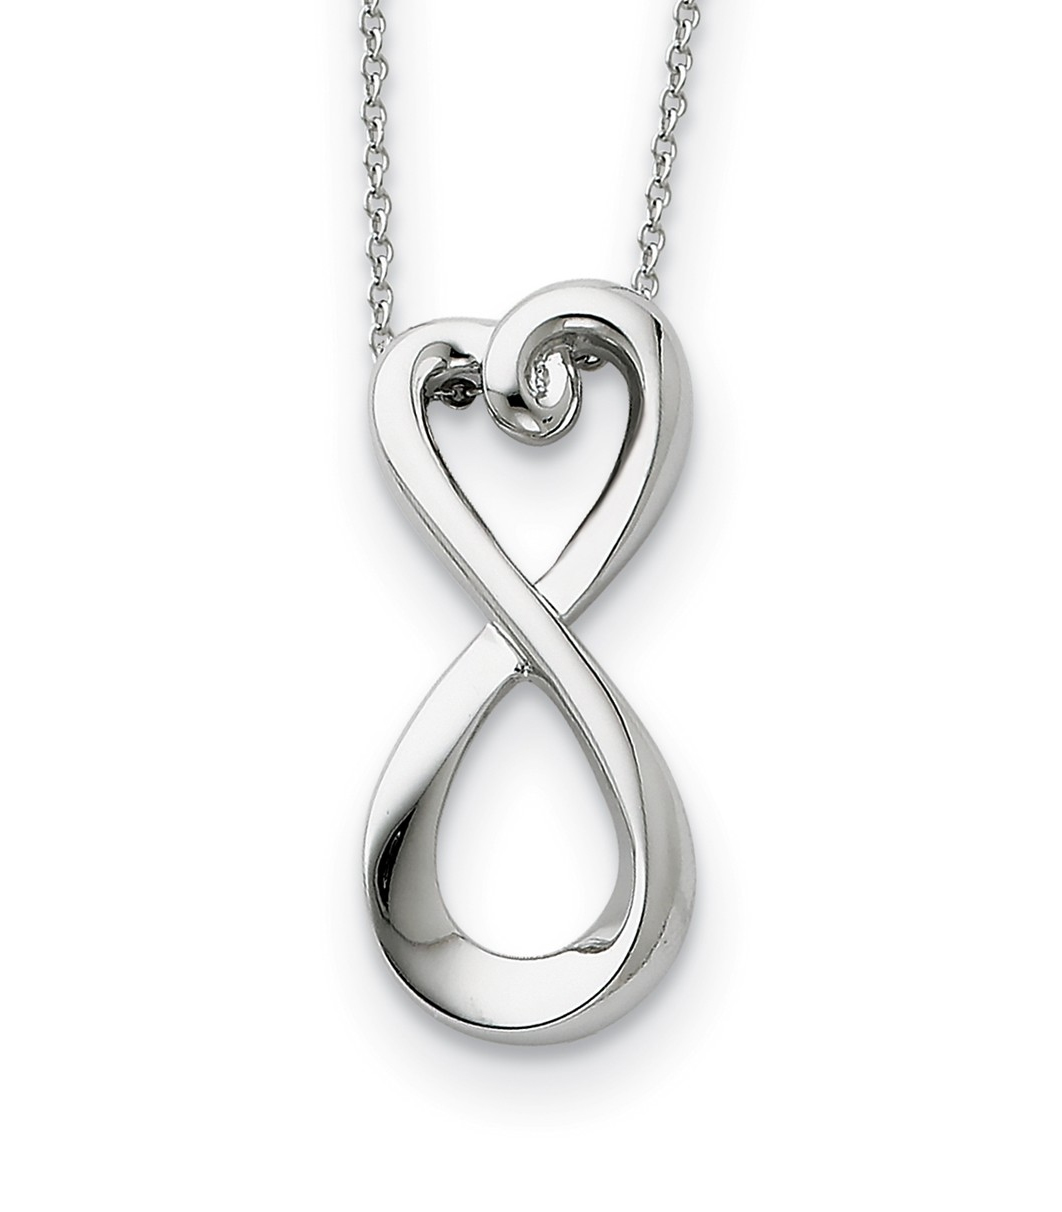  Infinite Love' Pendant Necklace, Rhodium-Plated Sterling Silver.